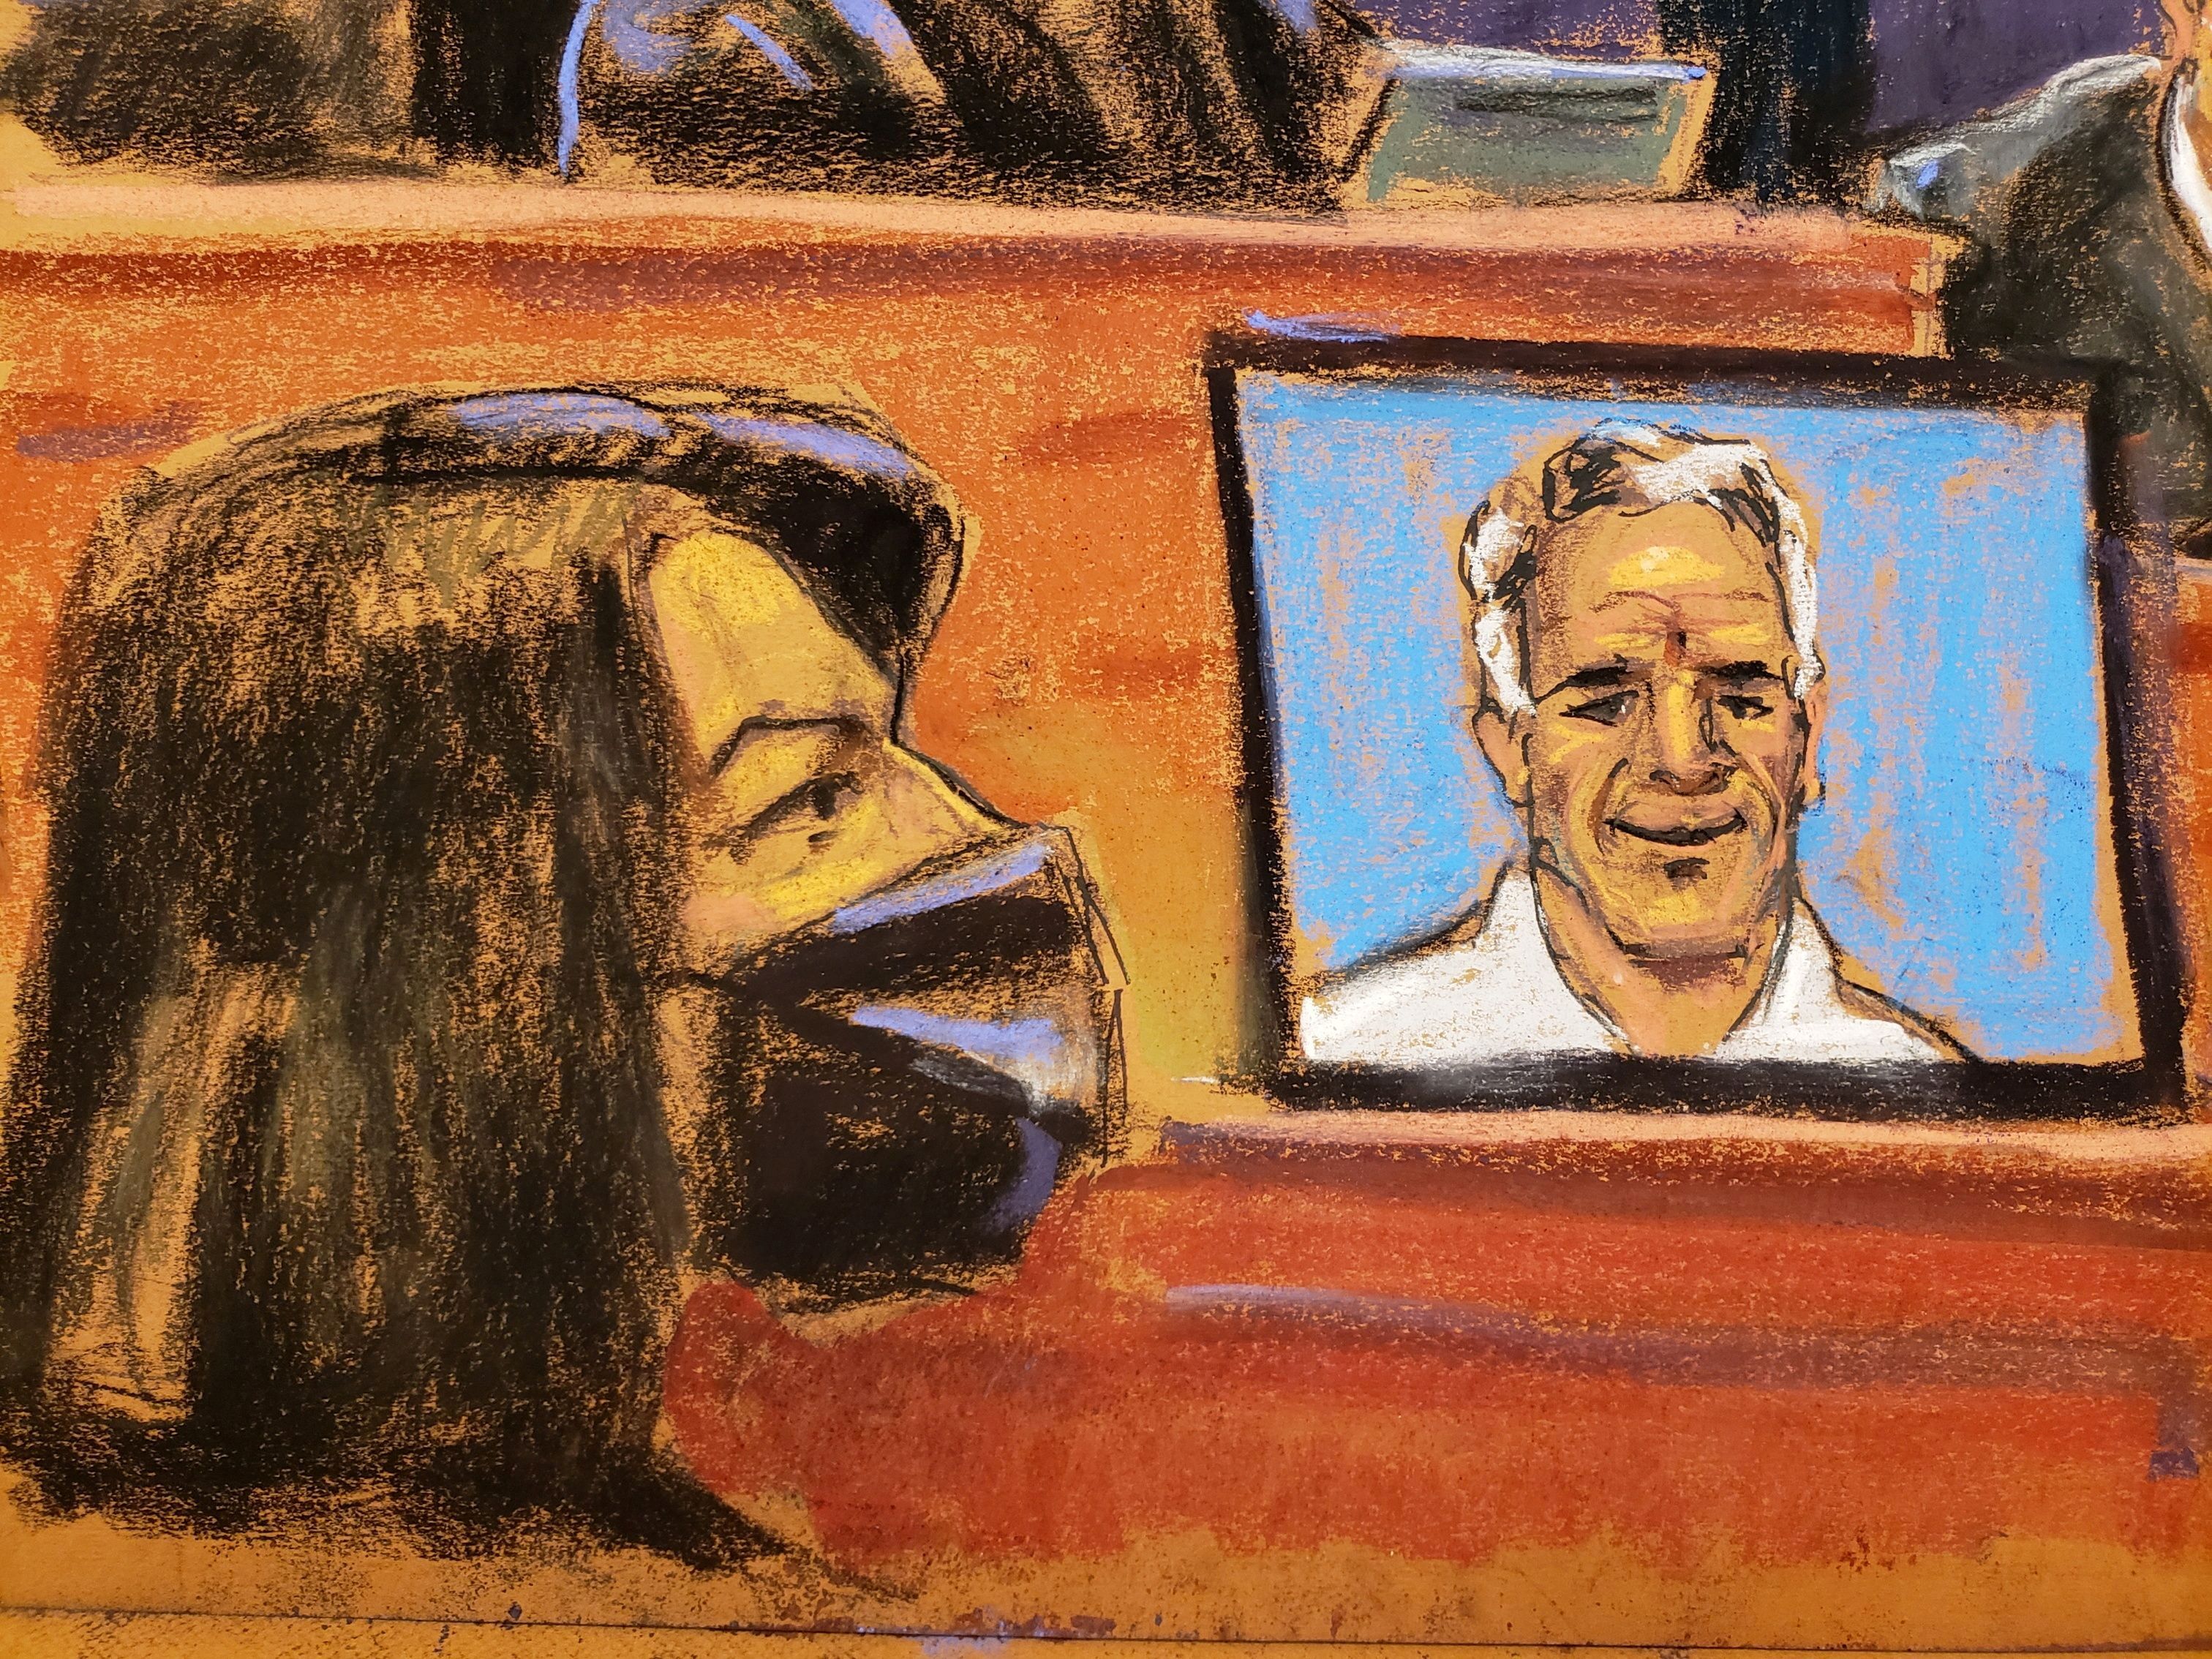 Ghislaine Maxwell, the Jeffrey Epstein associate accused of sex trafficking, attends her trial near an image of Epstein on a screen in a courtroom sketch in New York City, U.S., December 2, 2021. REUTERS/Jane Rosenberg